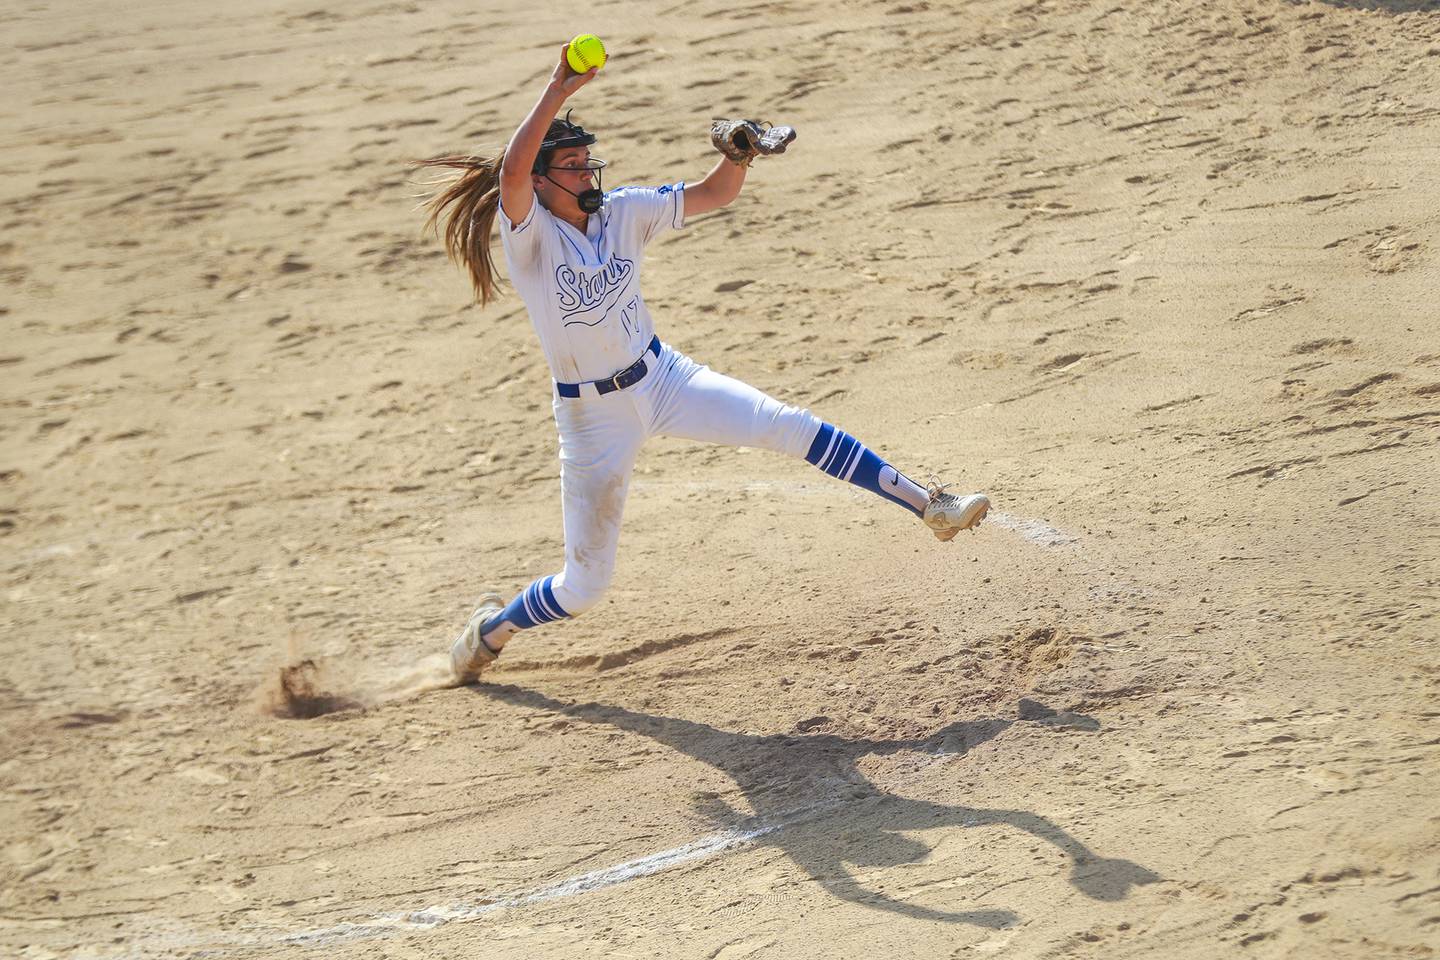 St. Charles North pitcher Ava Goettel winds up on Monday, June 14, 2021, at Carl Sandberg High School in Orland Park, Ill. The Knights defeated the Stars 5-4.